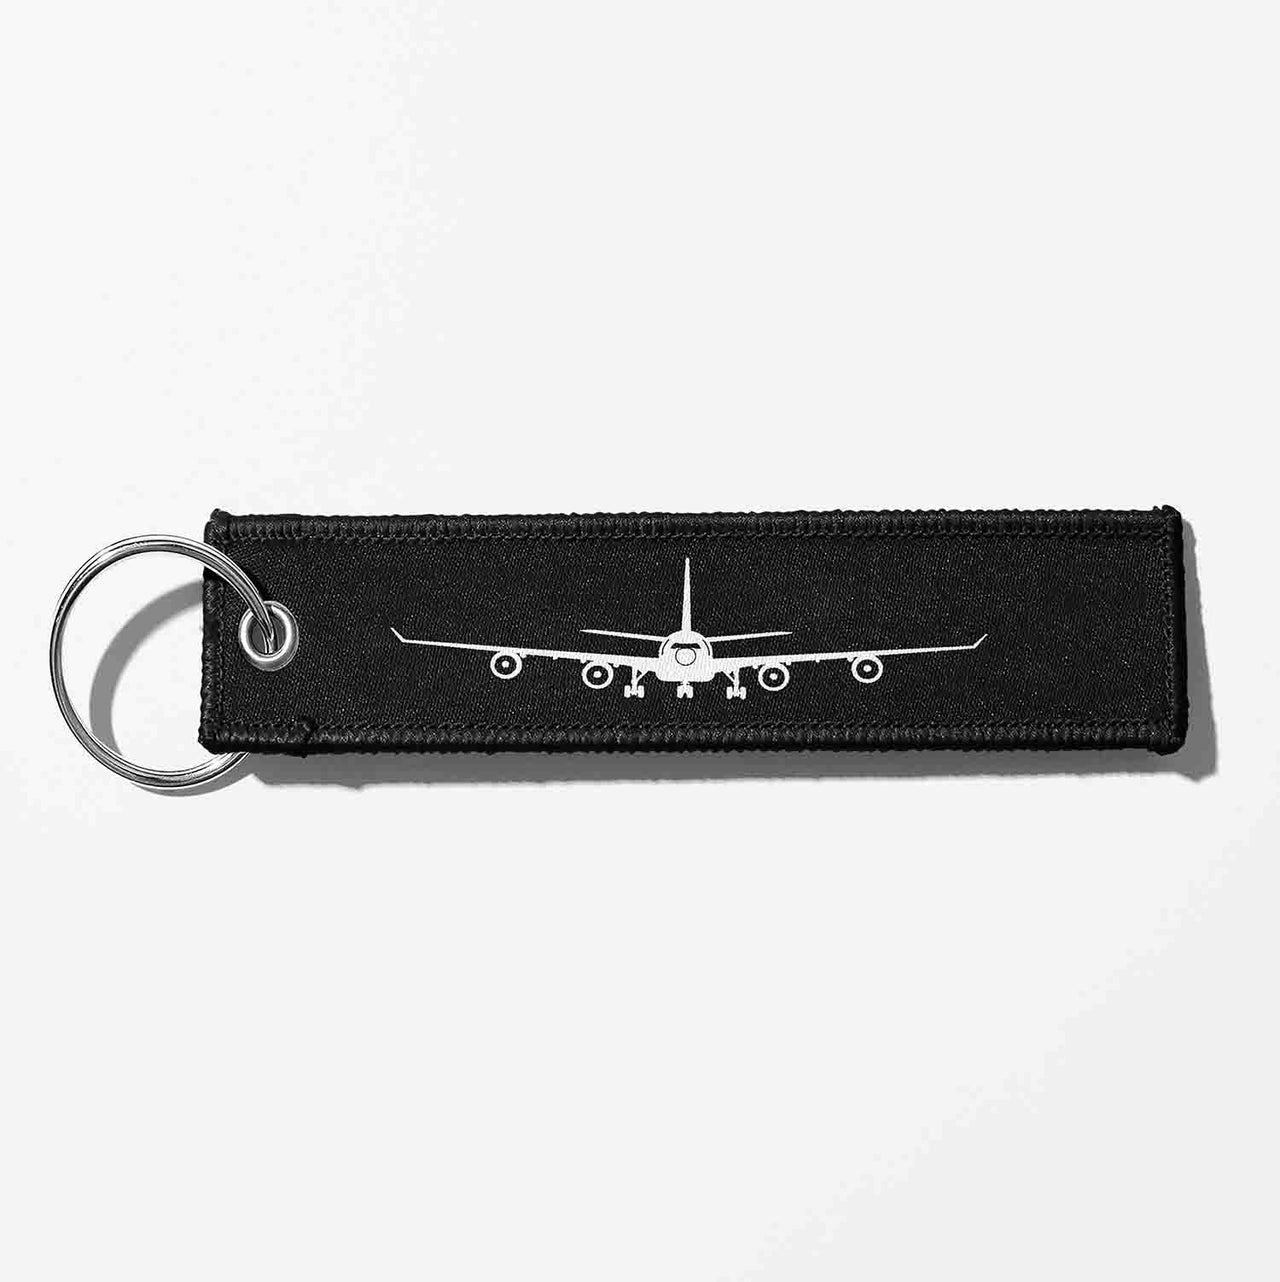 Airbus A340 Silhouette Designed Key Chains